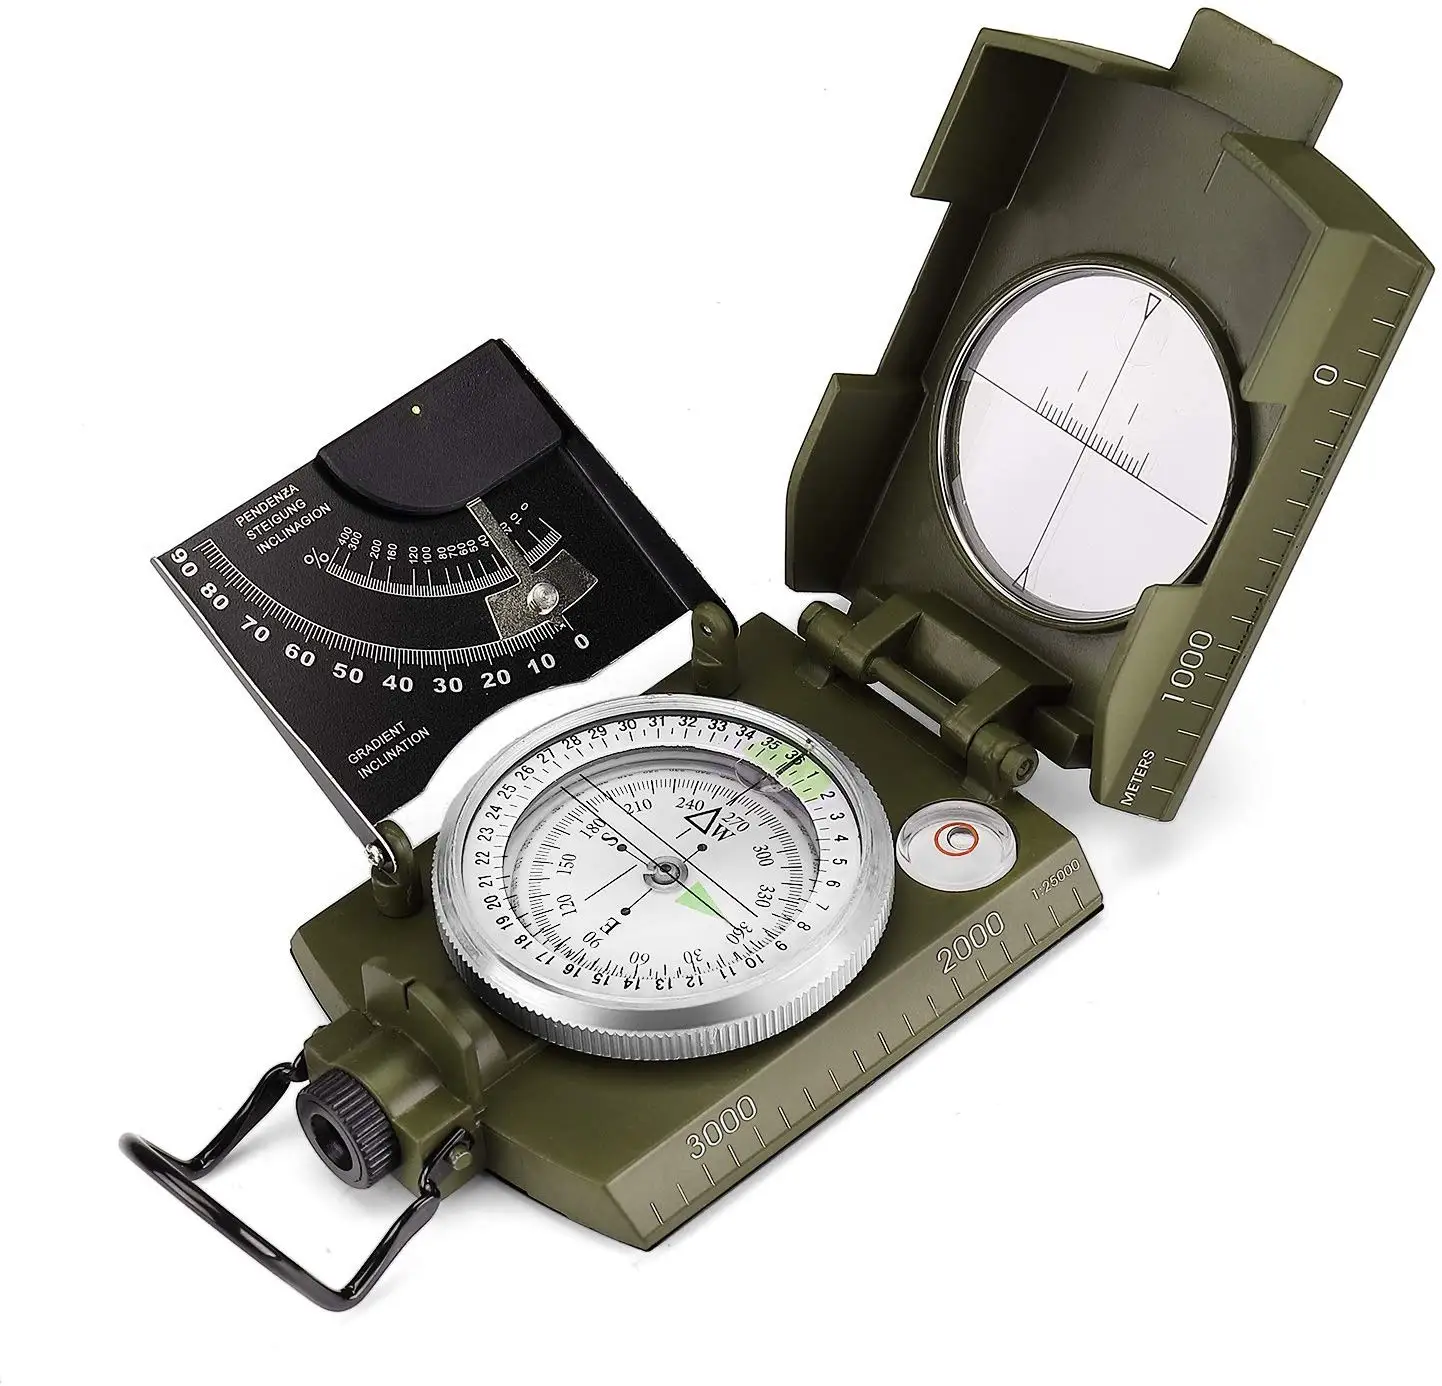 Bassizo Military Compass Clinometer Altimeter with Tripod Accuracy Sighting Waterproof Shockproof Lensatic Geological Compass for Distance Army Sand Table Outdoor Camping Hiking Teaching 